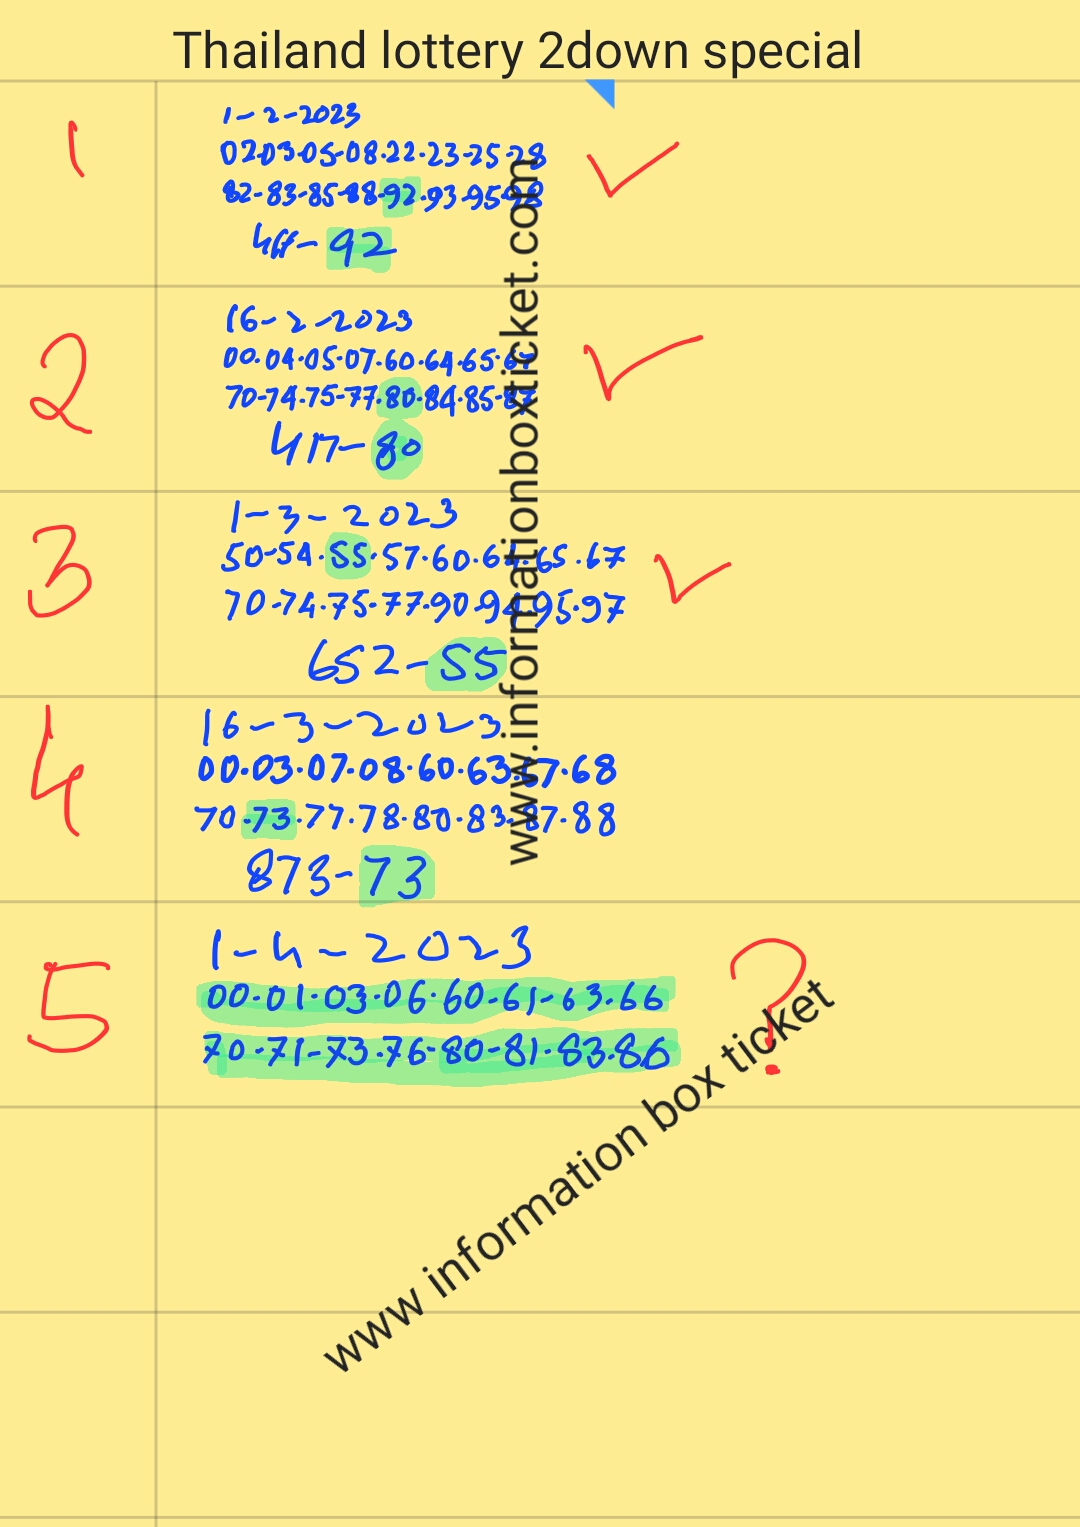 How To Play Thai Lottery ****1-4-2023****  Thailand Lottery 1234 | thai lottery sixline 789 | thai lotto free tip 123